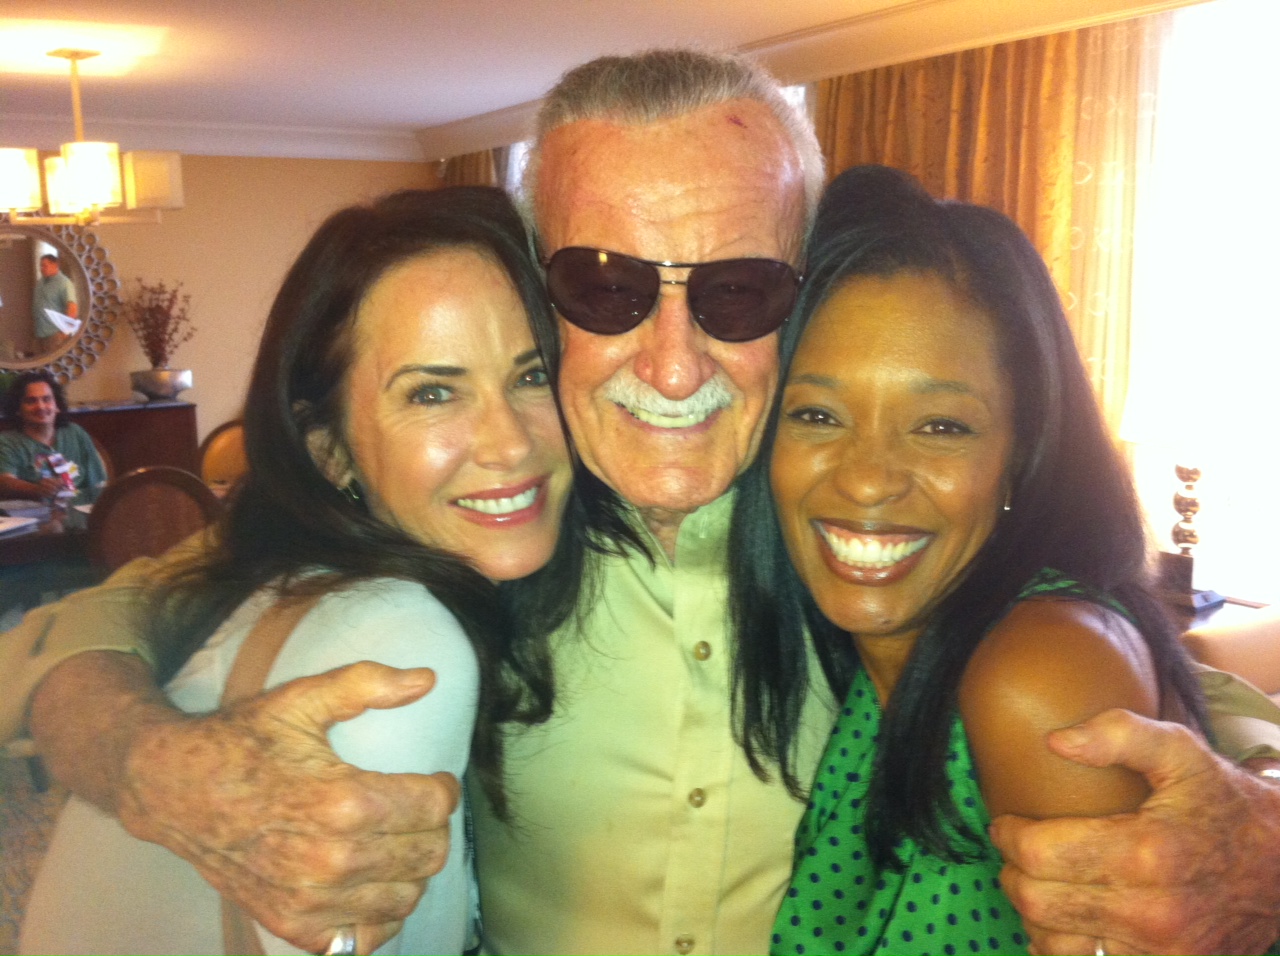 The one and only Stan Lee